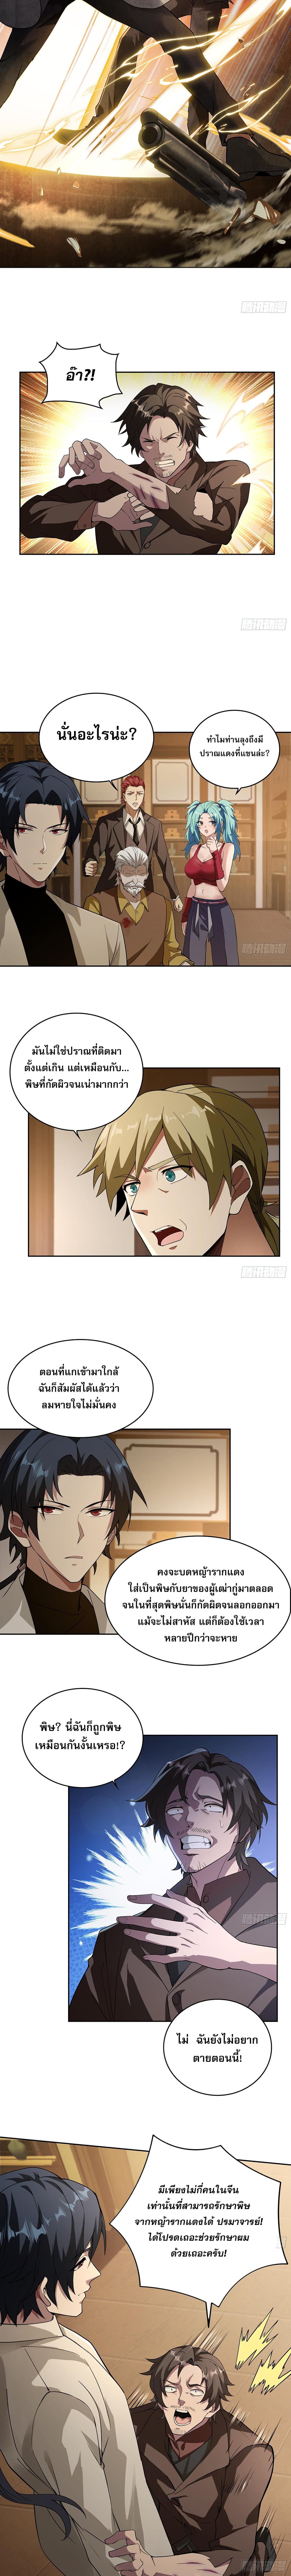 The All-Knowing Cultivator ผู้ฝึกตนผู้รอบรู้ 8/11